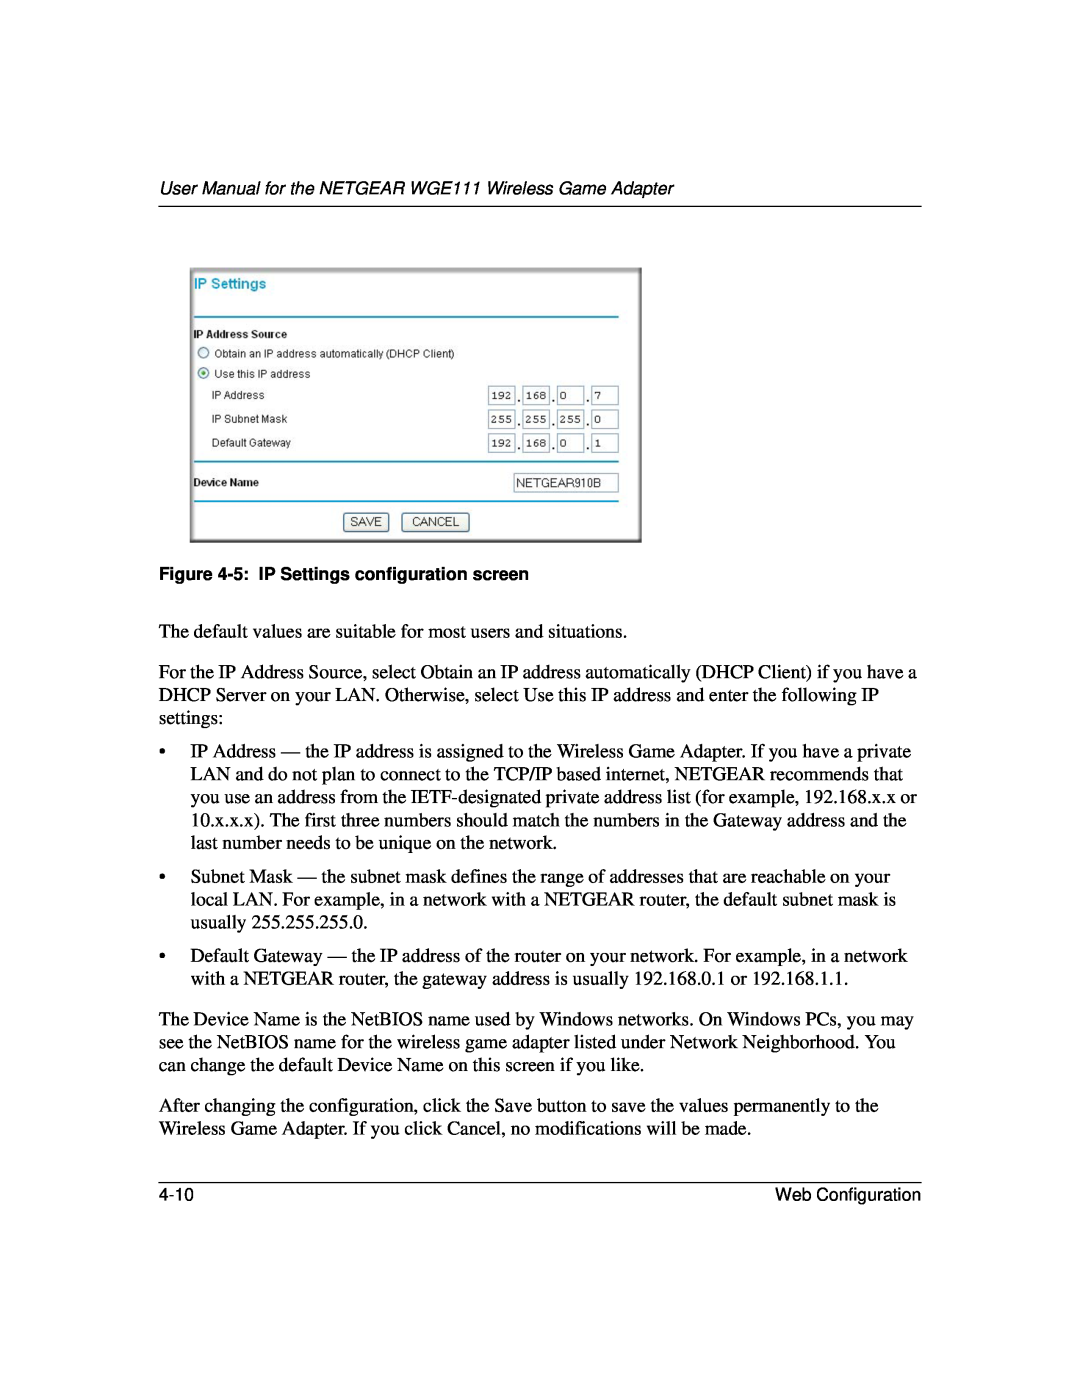 NETGEAR WGE111 user manual The default values are suitable for most users and situations 